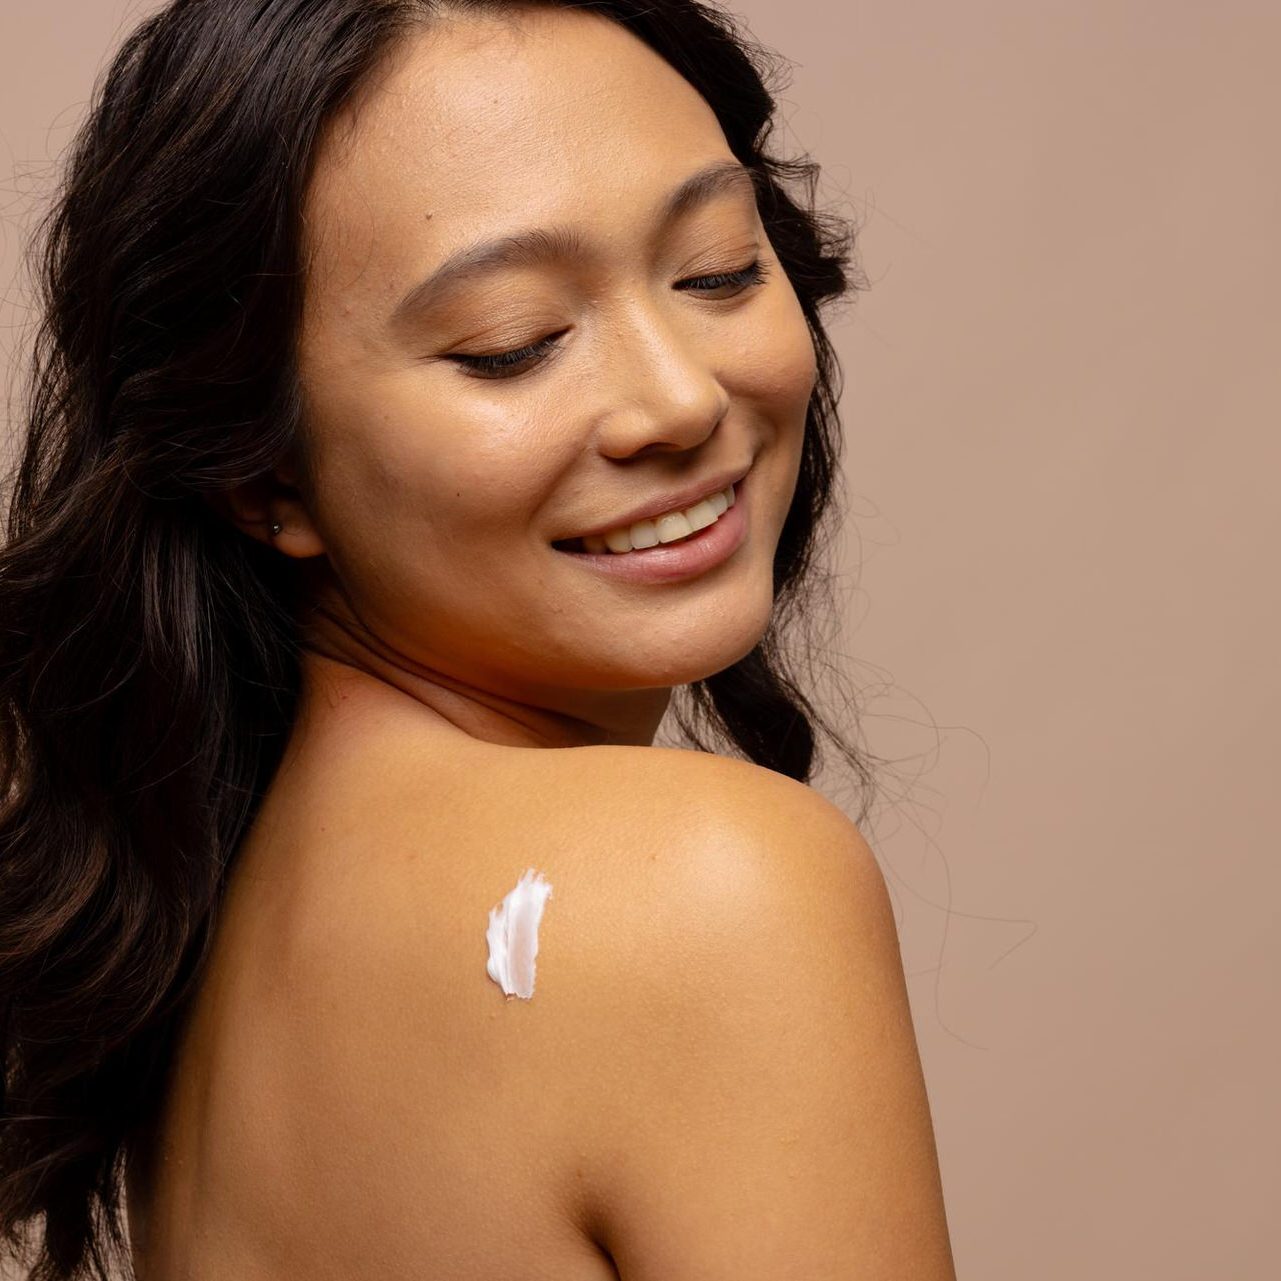 smiling-asian-woman-with-dark-hair-with-skin-cream-her-bare-shoulder-copy-space